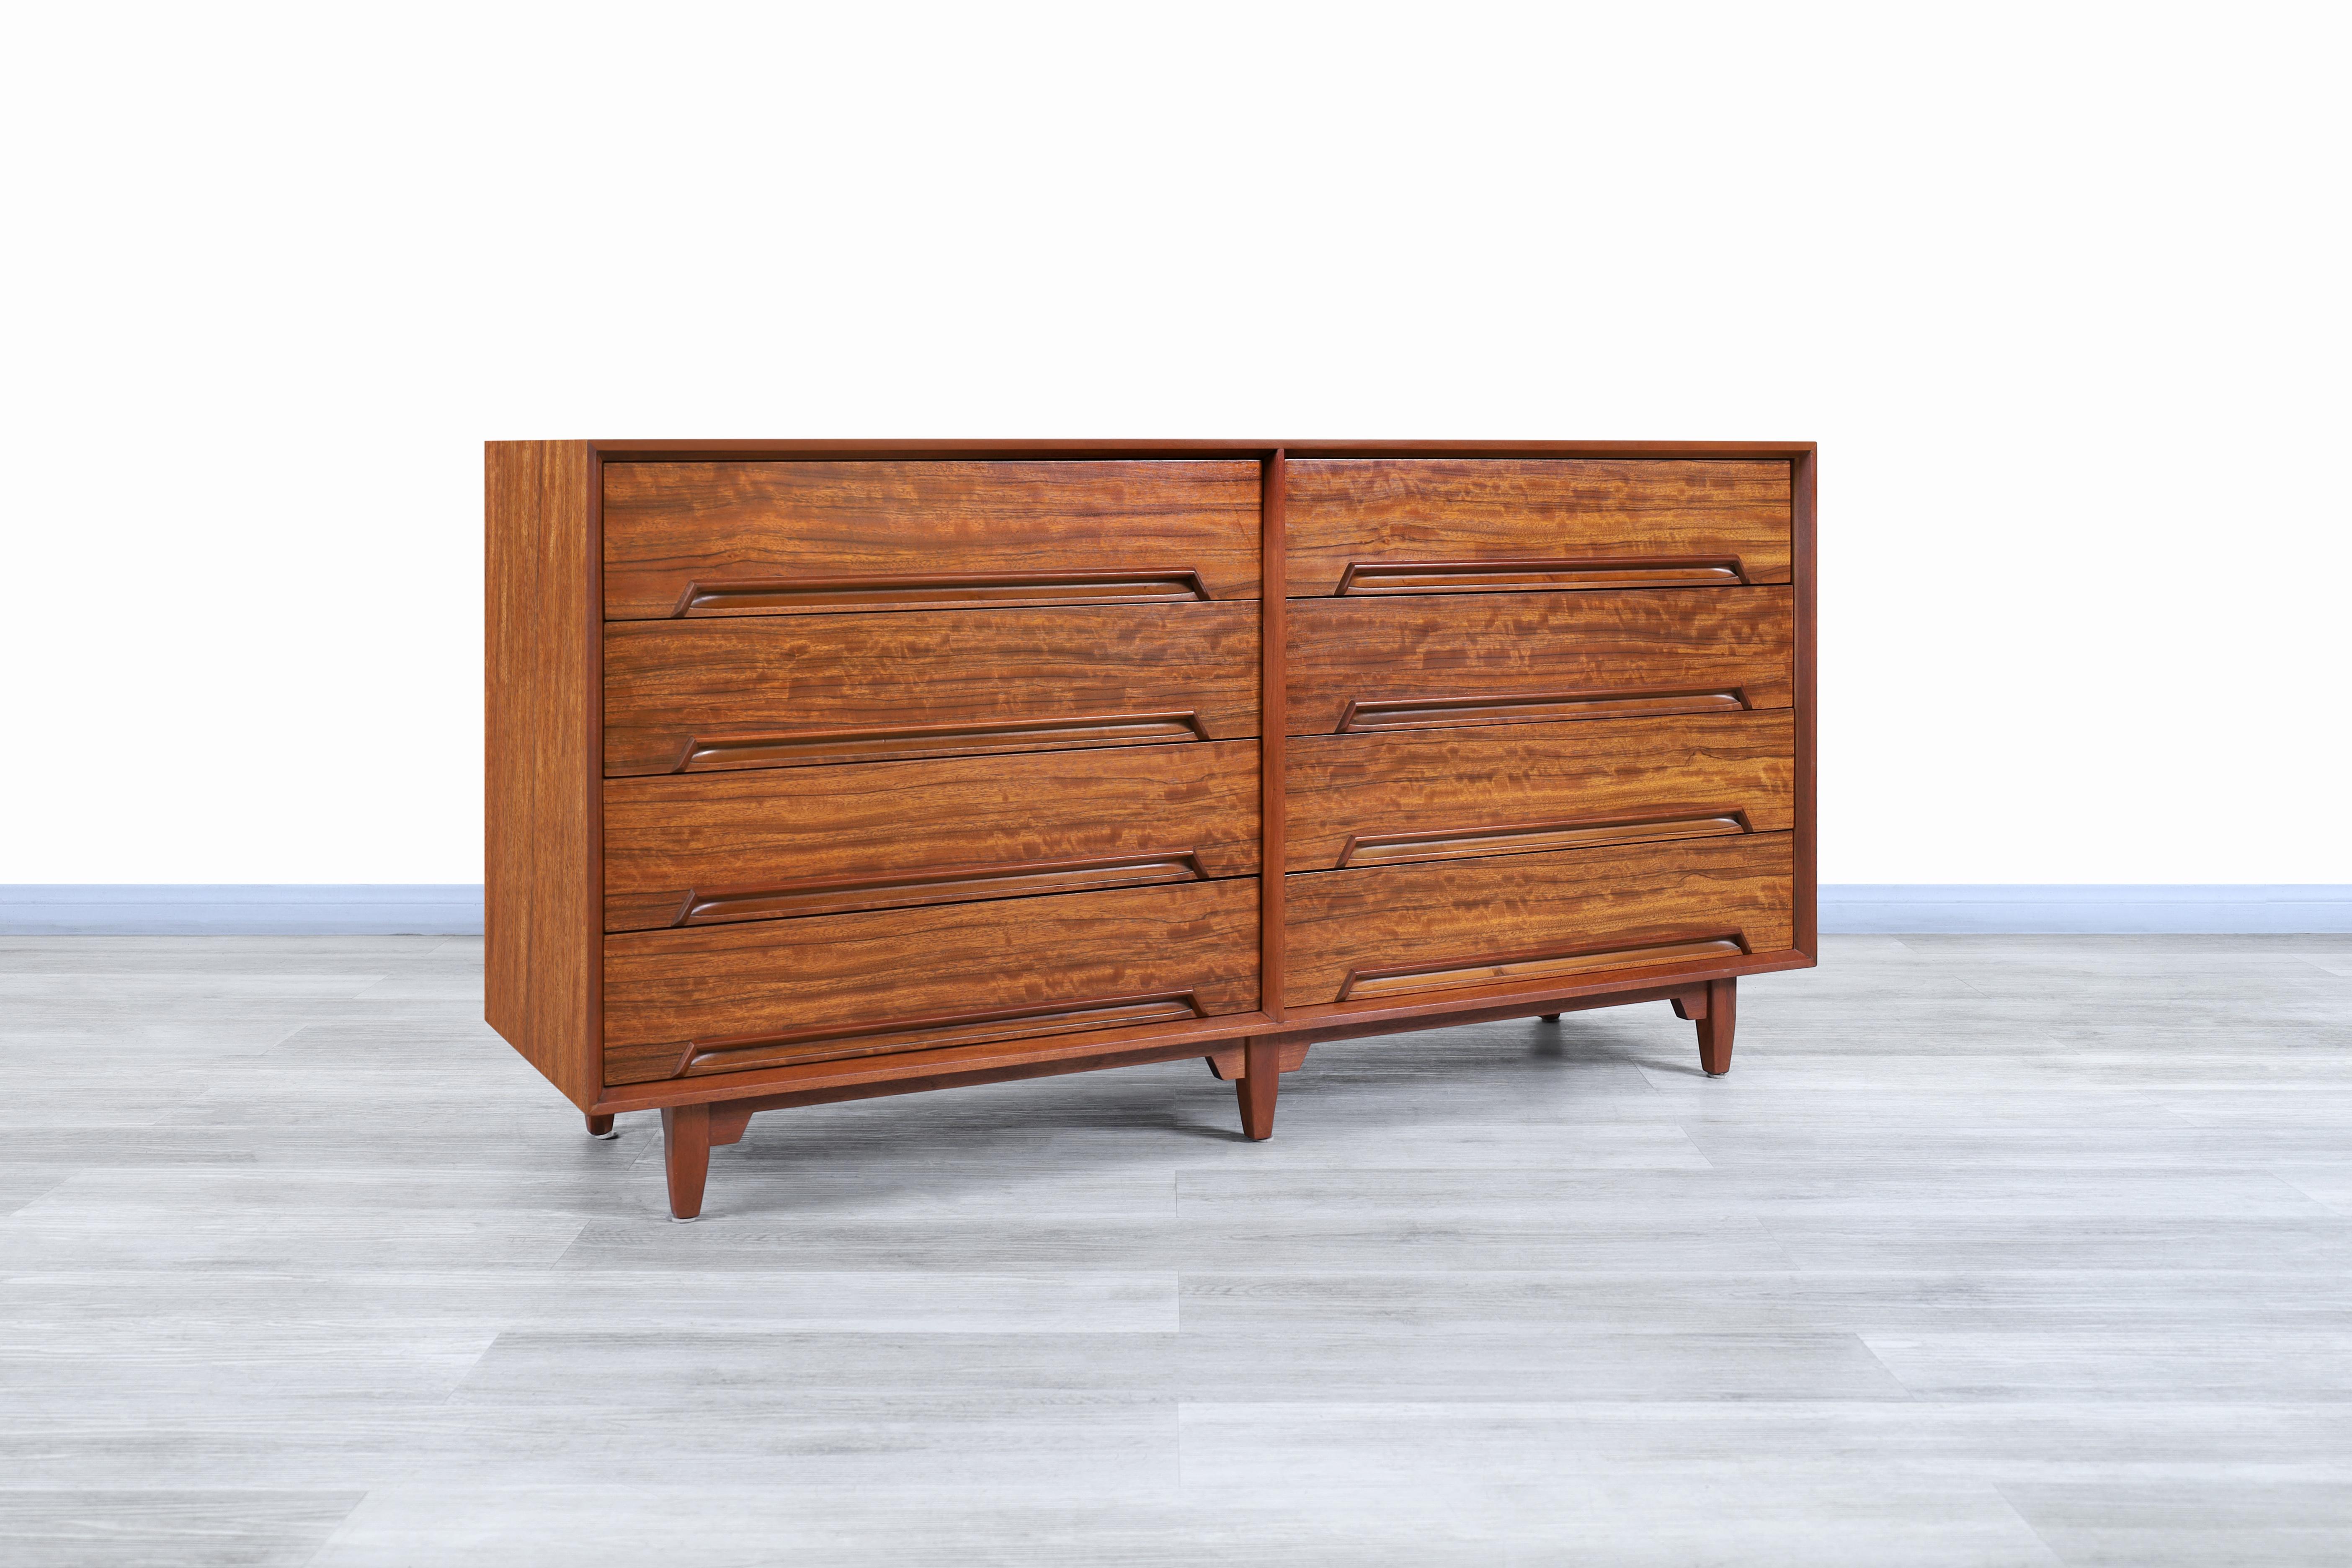 Stunning midcentury dresser designed by Milo Baughman for Drexel´s “Perspective” collection in the United States, circa 1950s. This dresser has been constructed from an exotic and beautiful Mindoro wood imported from the Philippines and belongs to